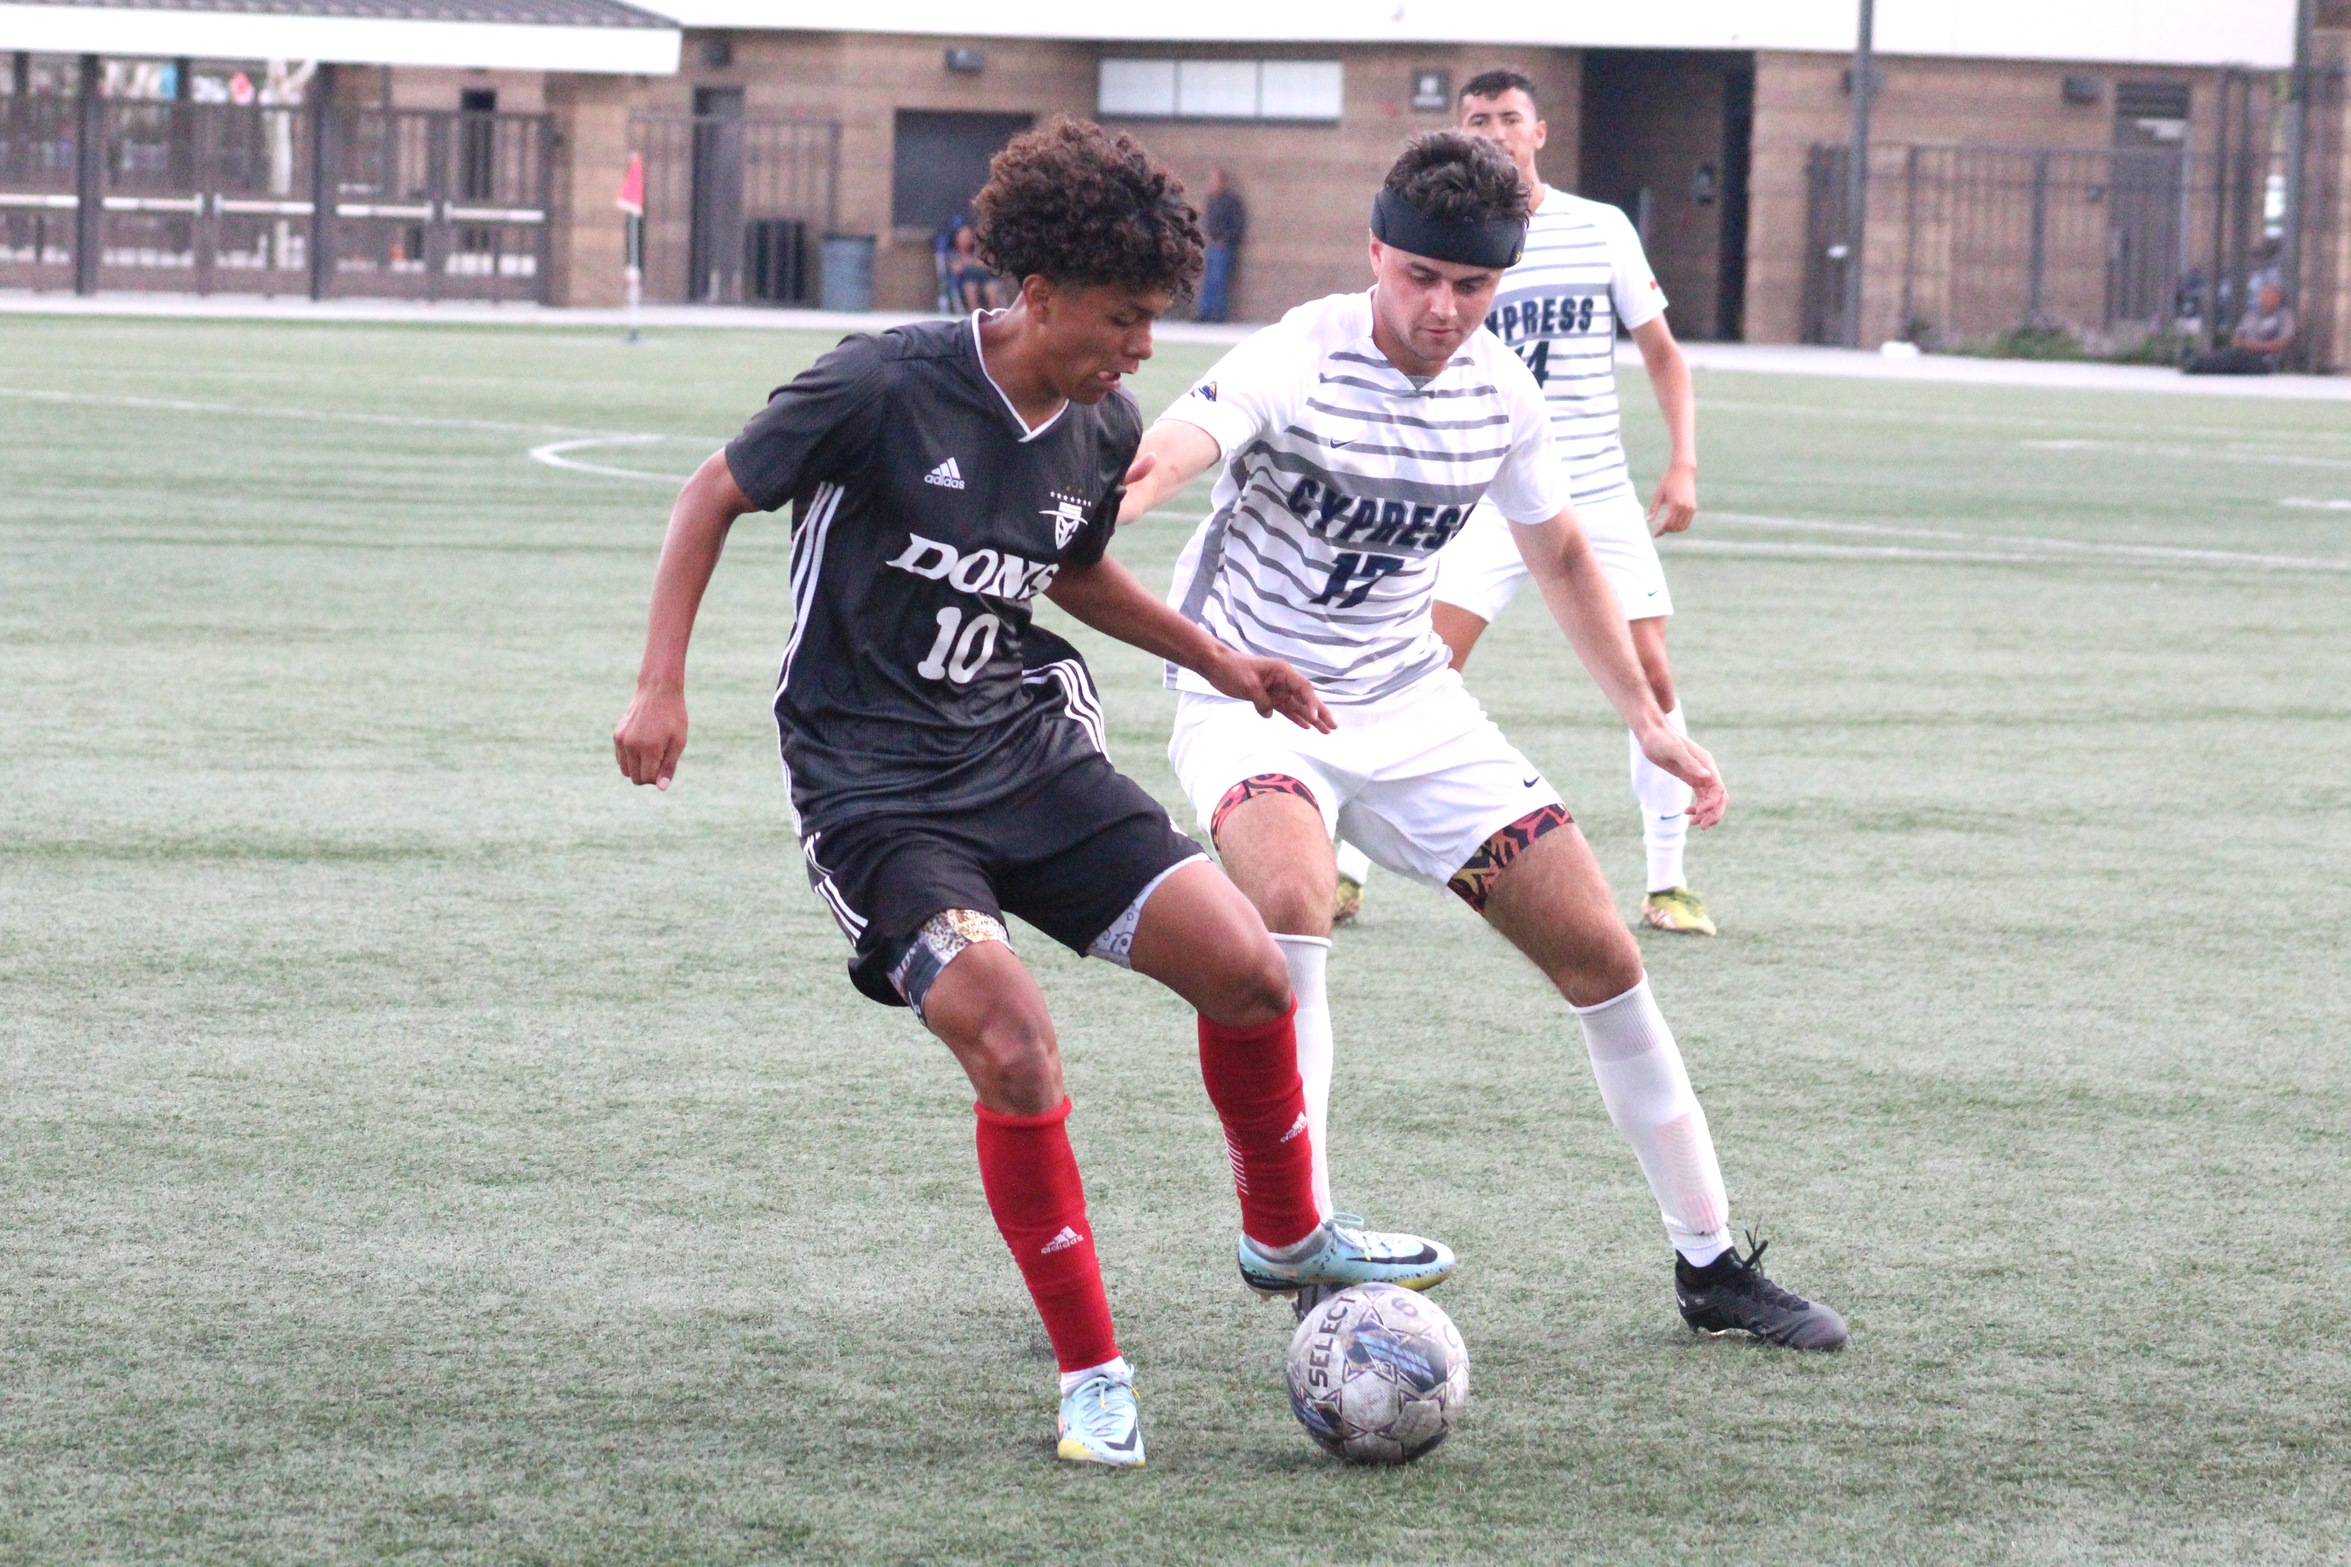 Martinez Leads Dons to 1-0 Win Over Cypress